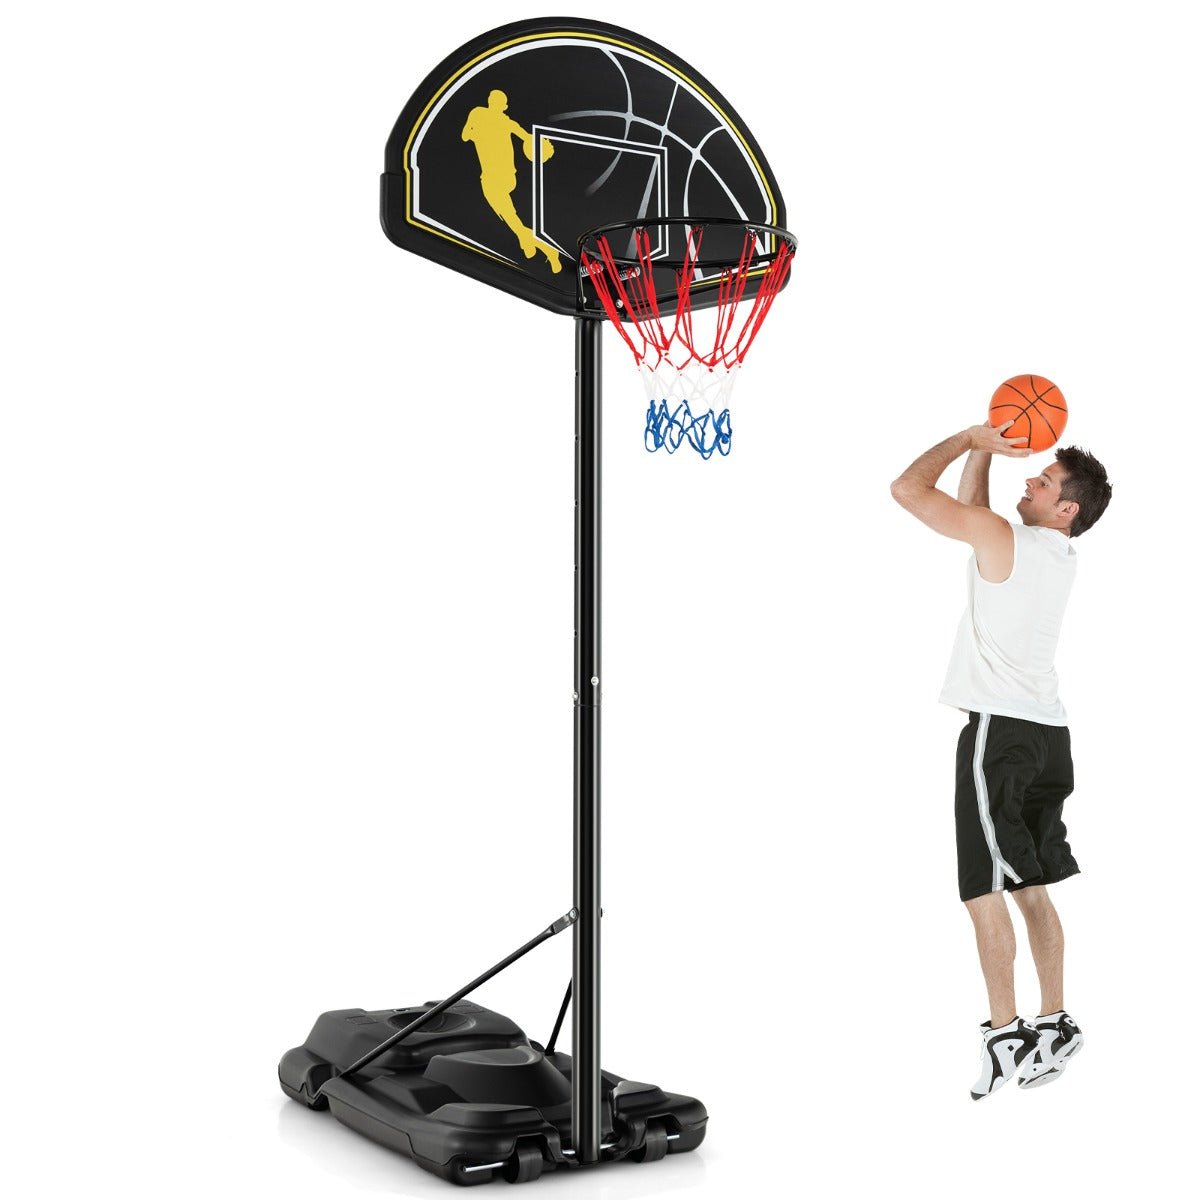 Portable Basketball Hoop for Kids: Easy Mobility with Wheels & Fillable Base